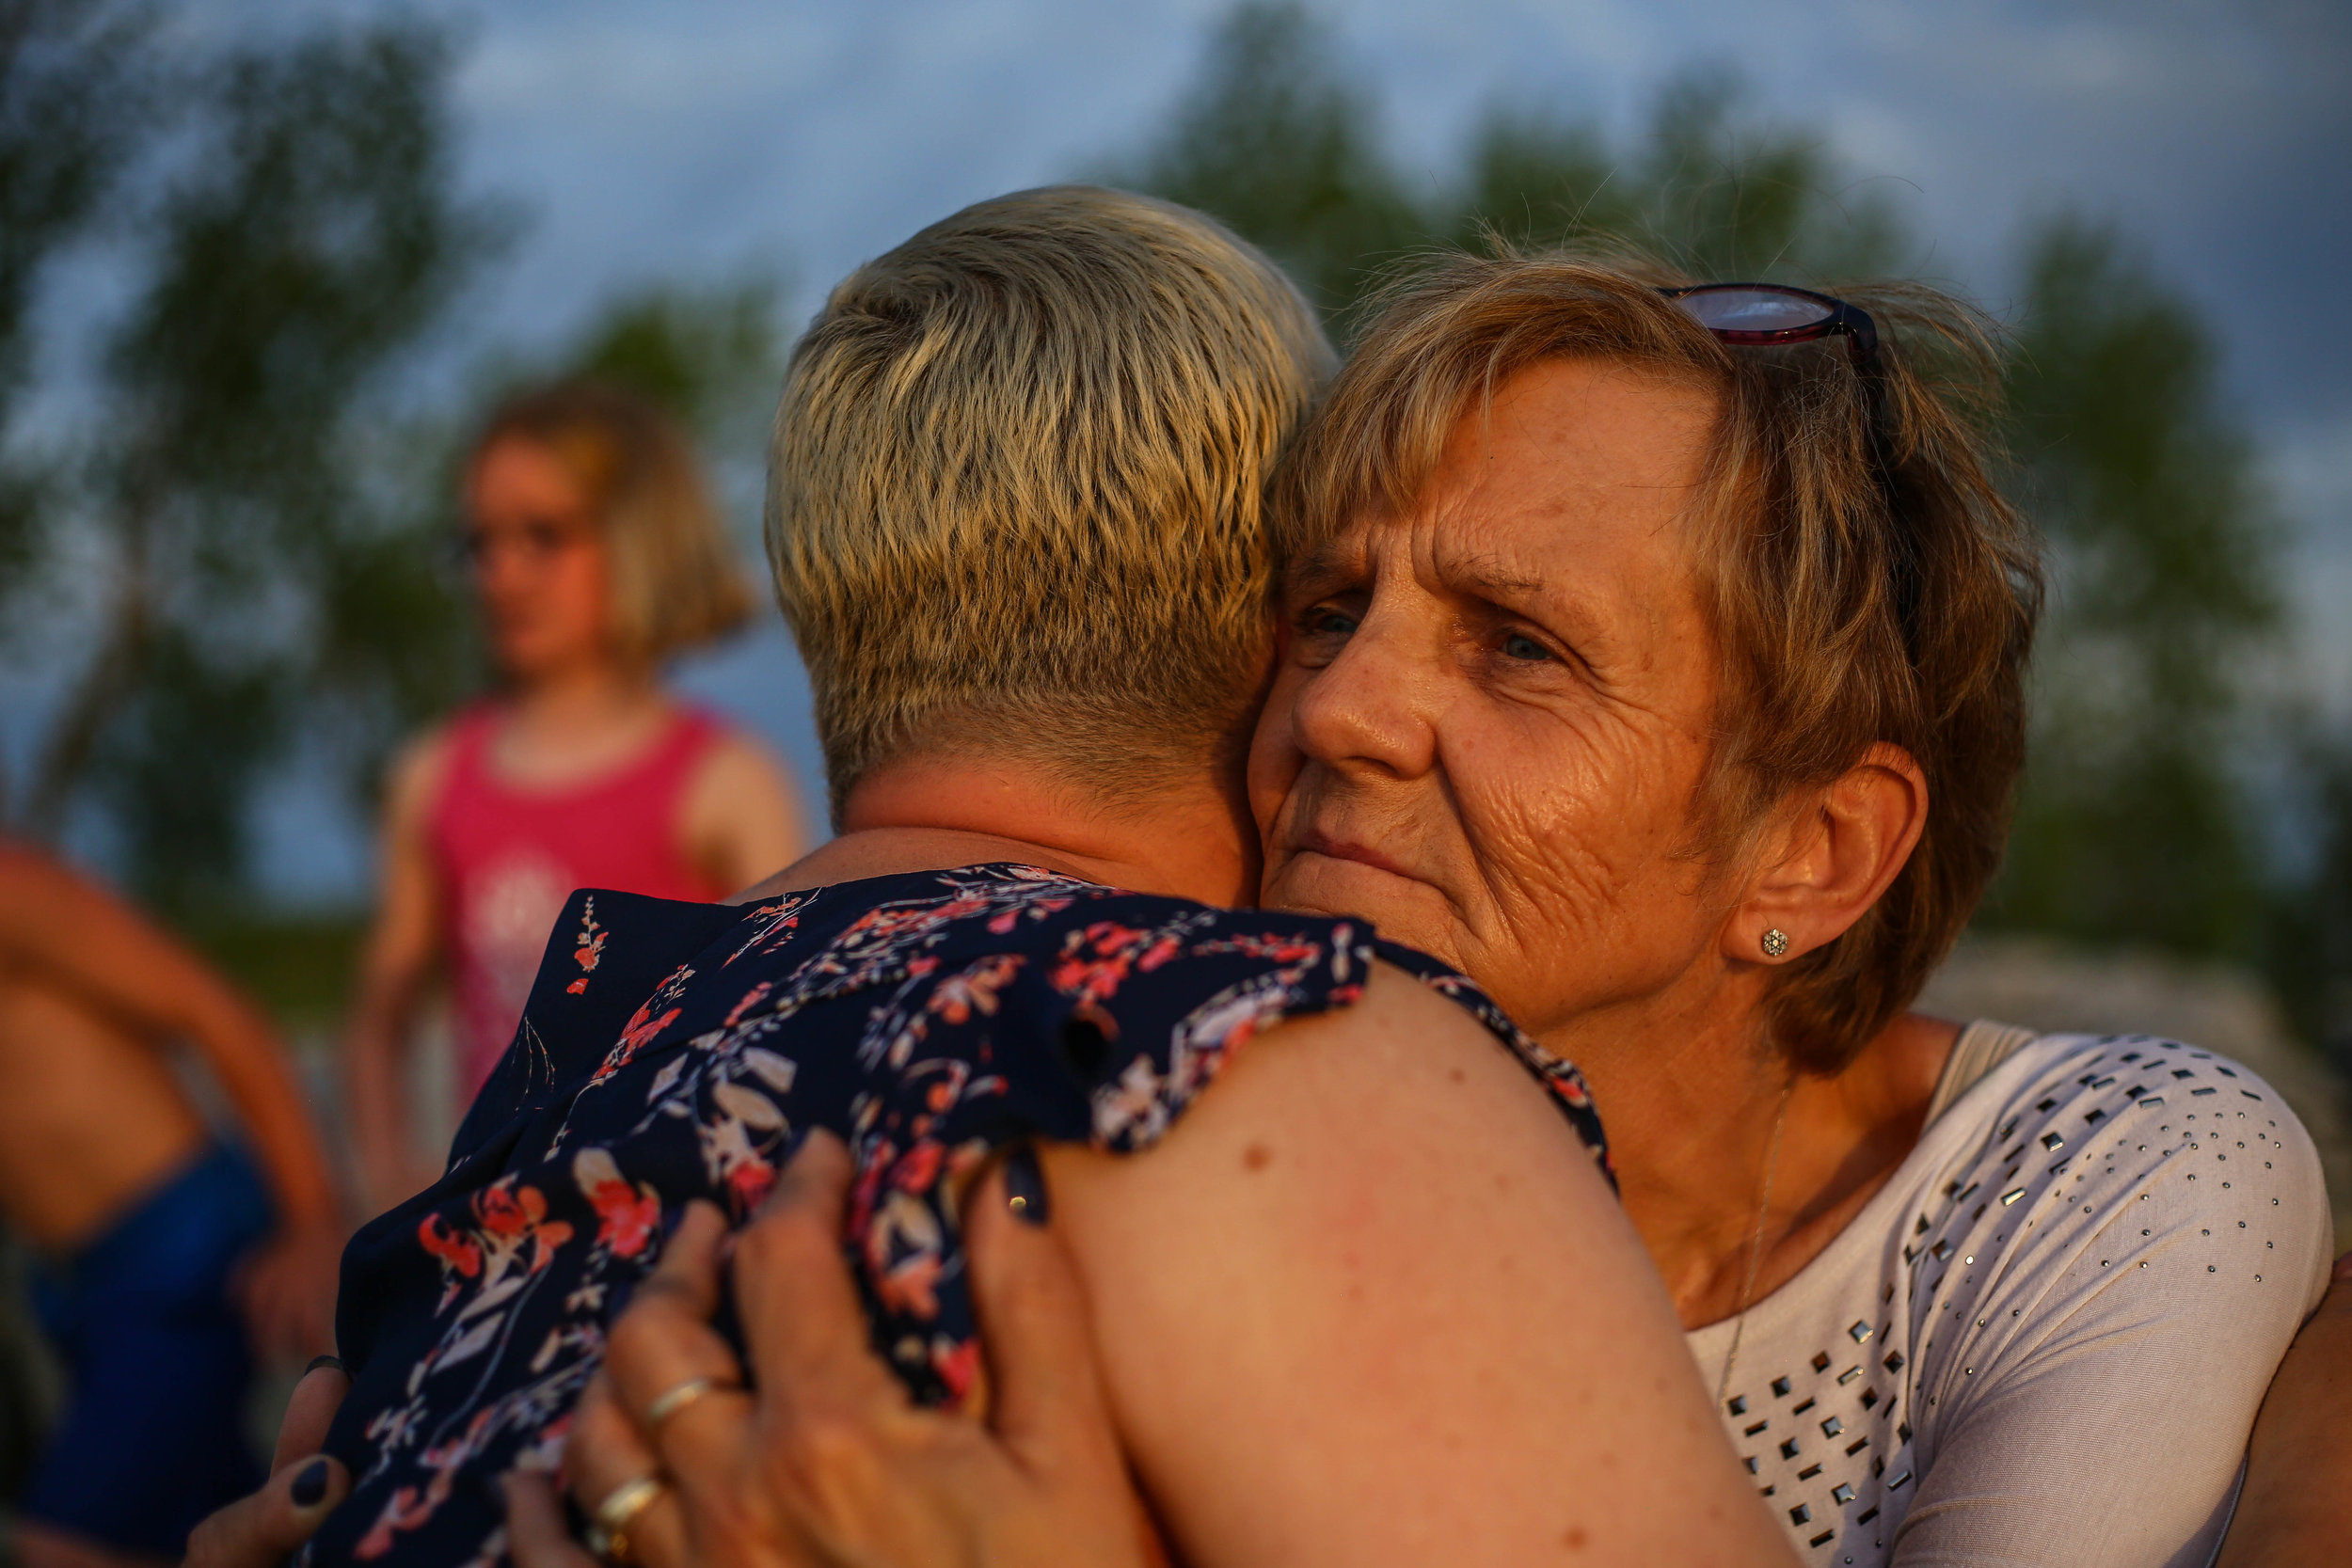  Amanda's mother Janet gives her a hug while Kayla and Cameron play in the background at Muskegon State Park, in Muskegon, Michigan on Saturday, June 8, 2019. 